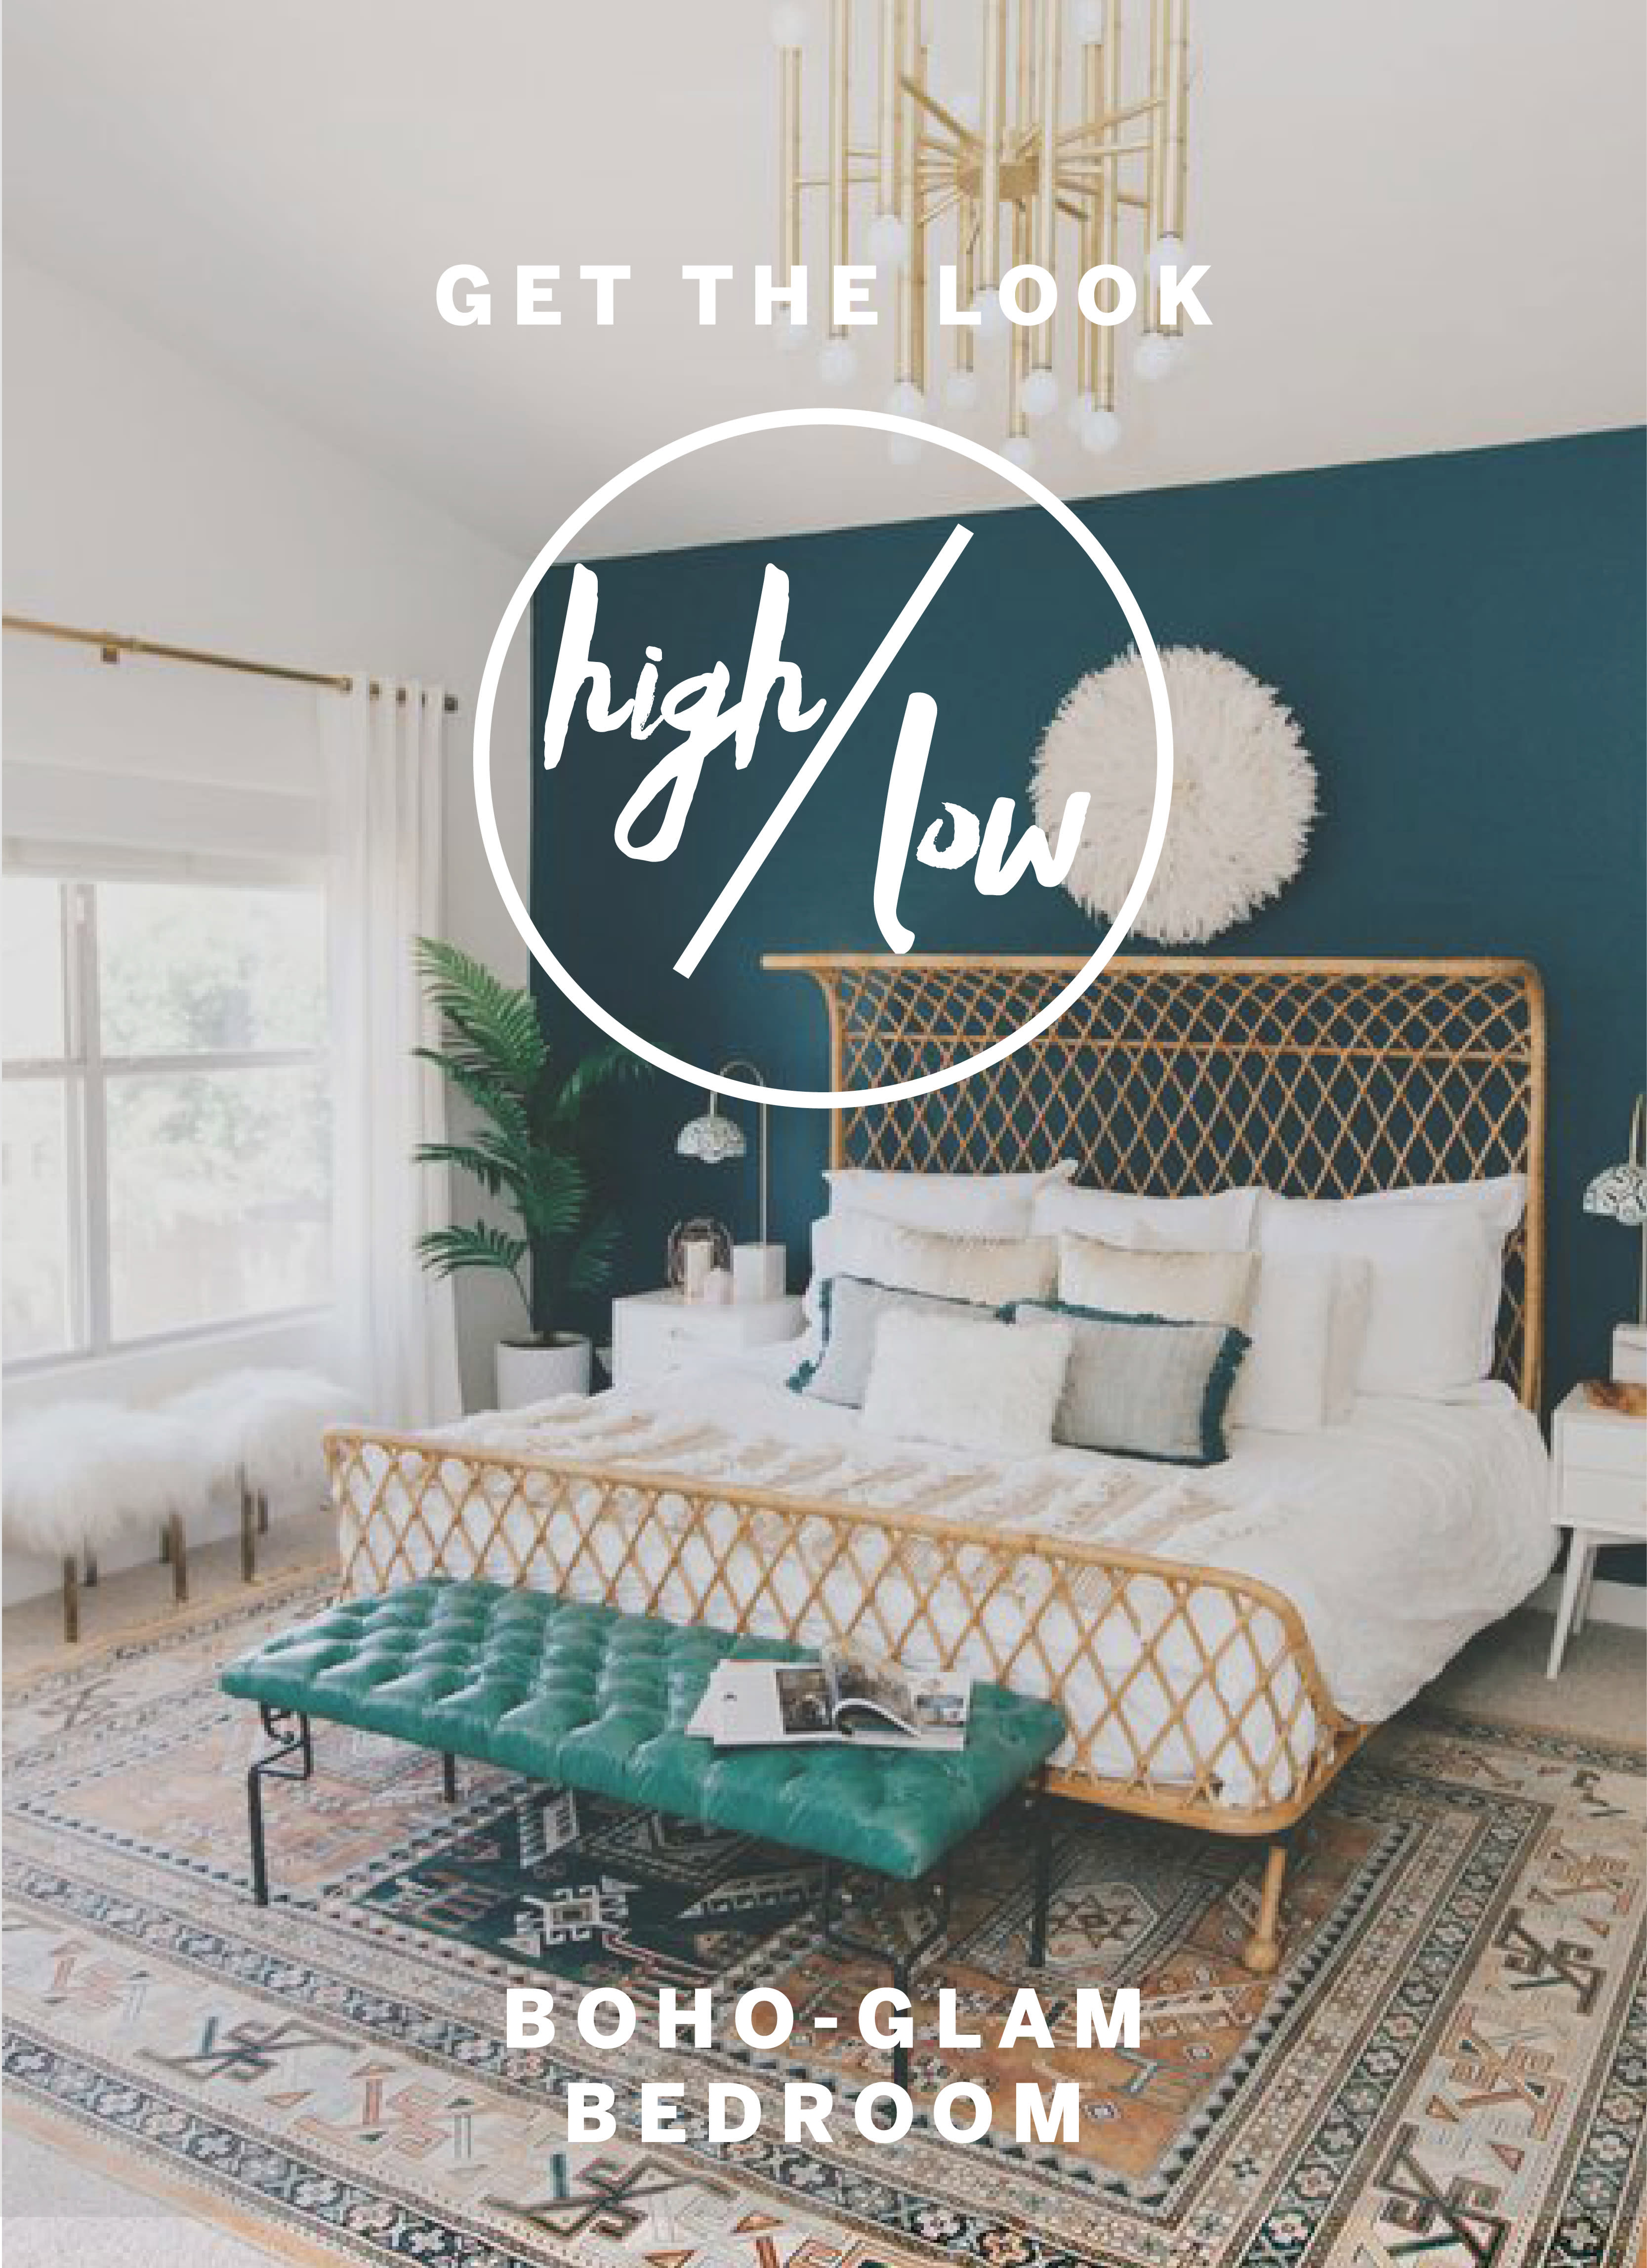 High & Low: Get the Boho Glam Bedroom Look | Apartment Therapy